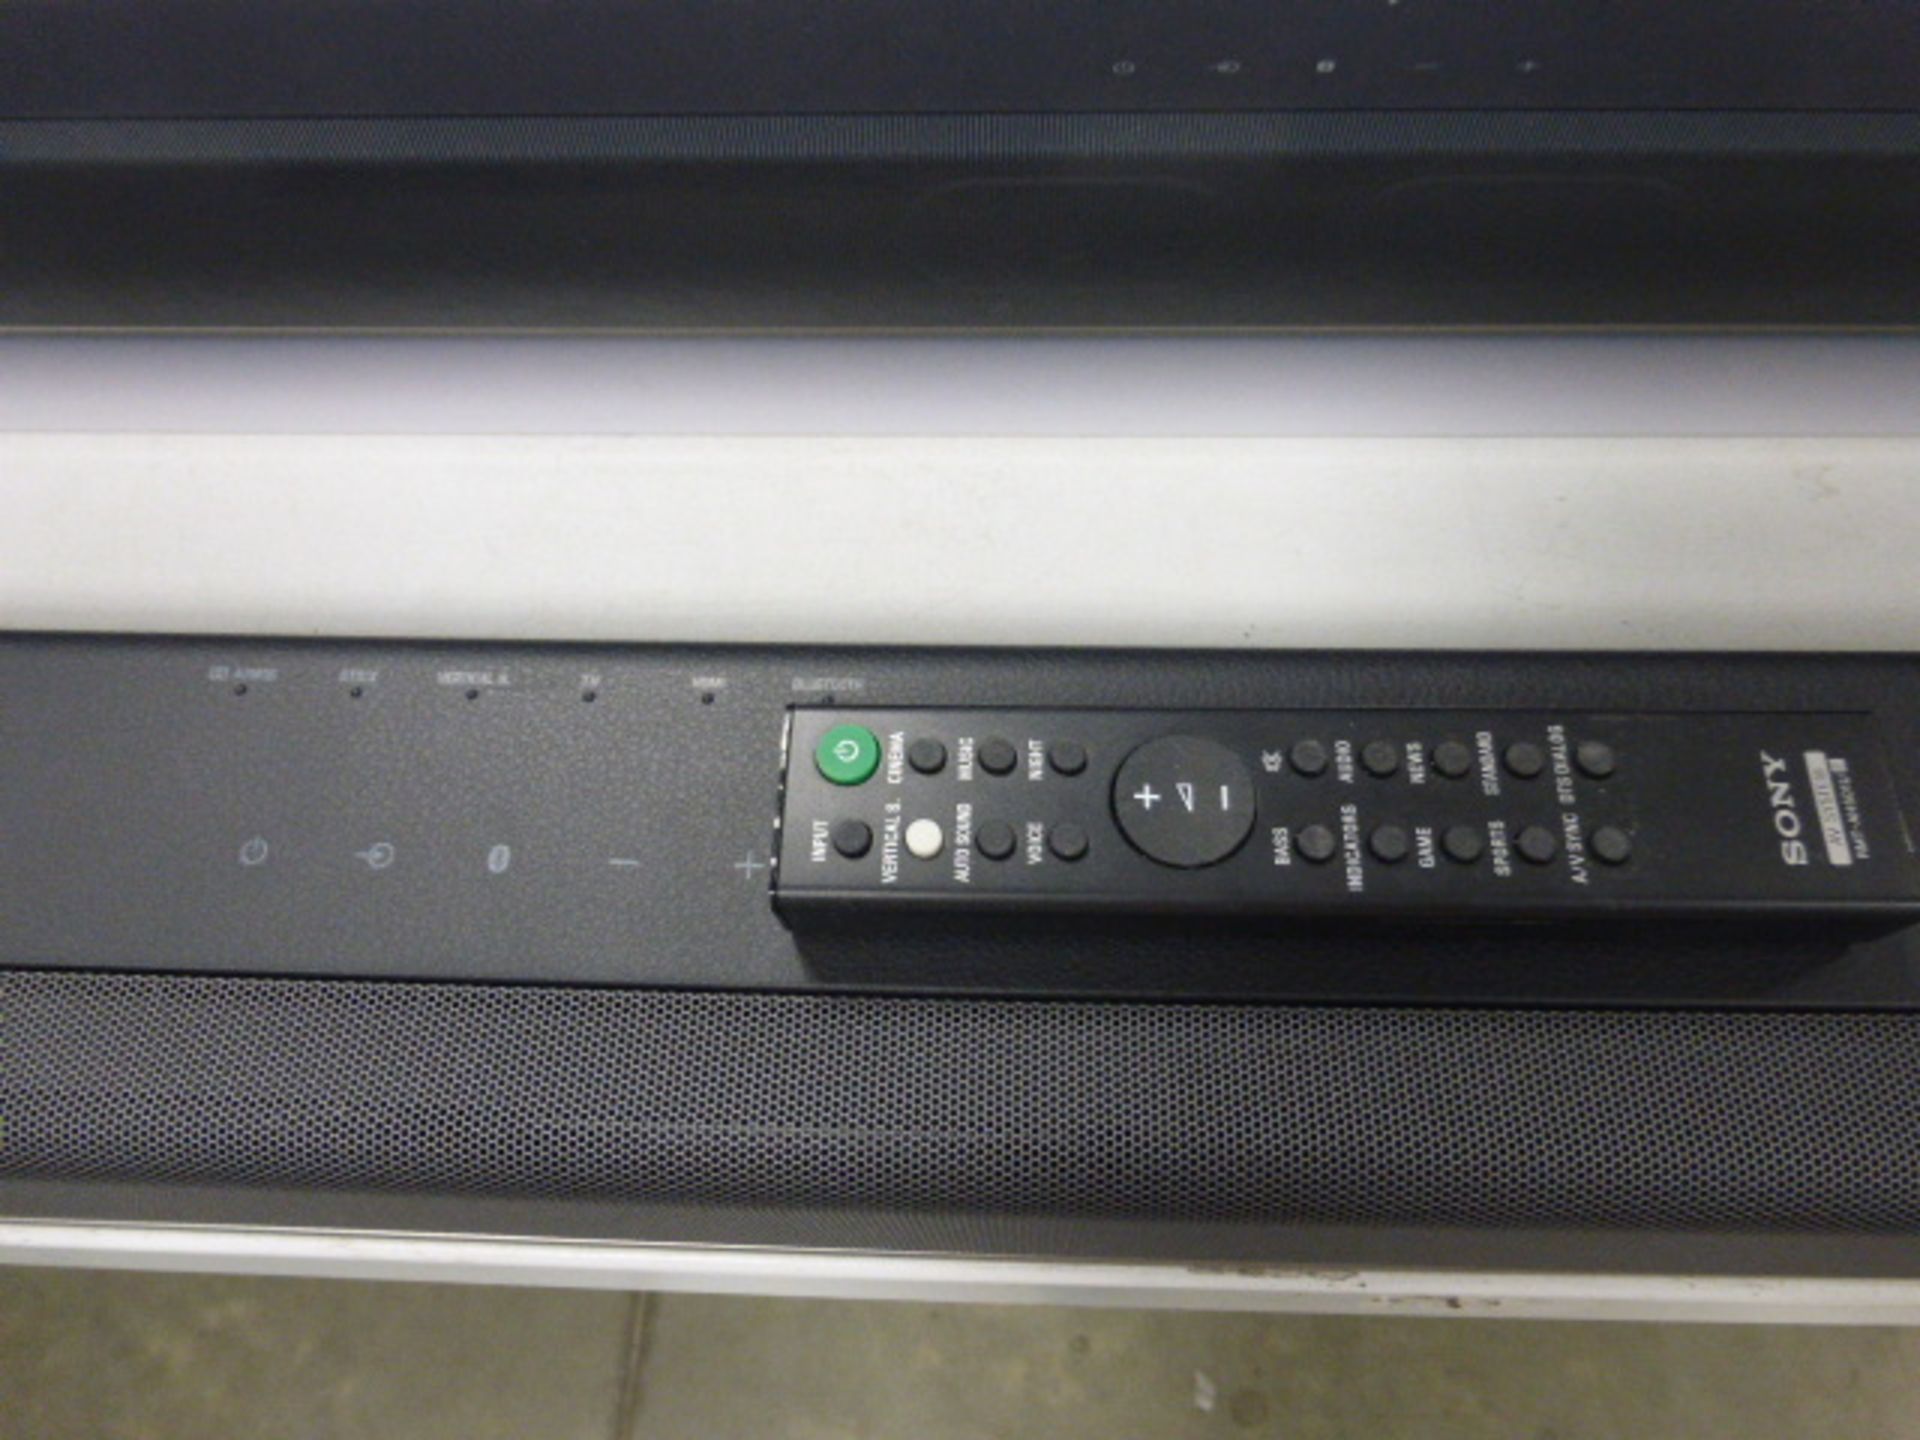 Sony Ht-X8500 Dolby Atmos 2.1 channel soundbar with remote Item connects to bluetooth. There are - Image 2 of 2